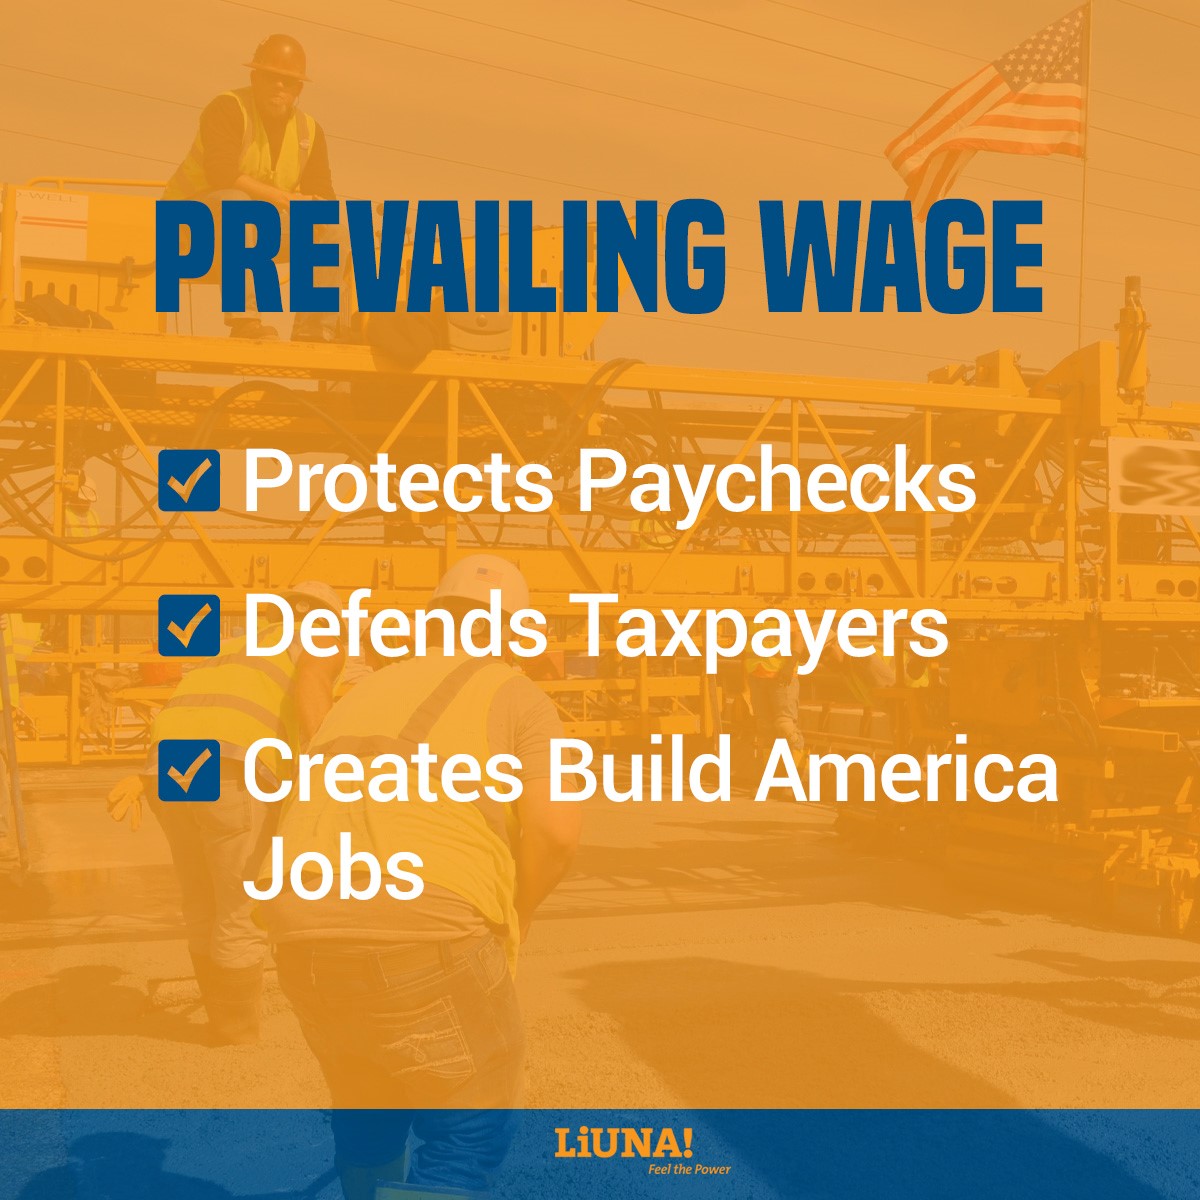 #PrevailingWage laws ensure that all contractors bidding on public construction projects will pay
family-supporting wages. 

In turn these projects will be built to the highest standards by skilled, safe, well-trained construction craftspeople like #LiUNA members!

#LiUNABuilds